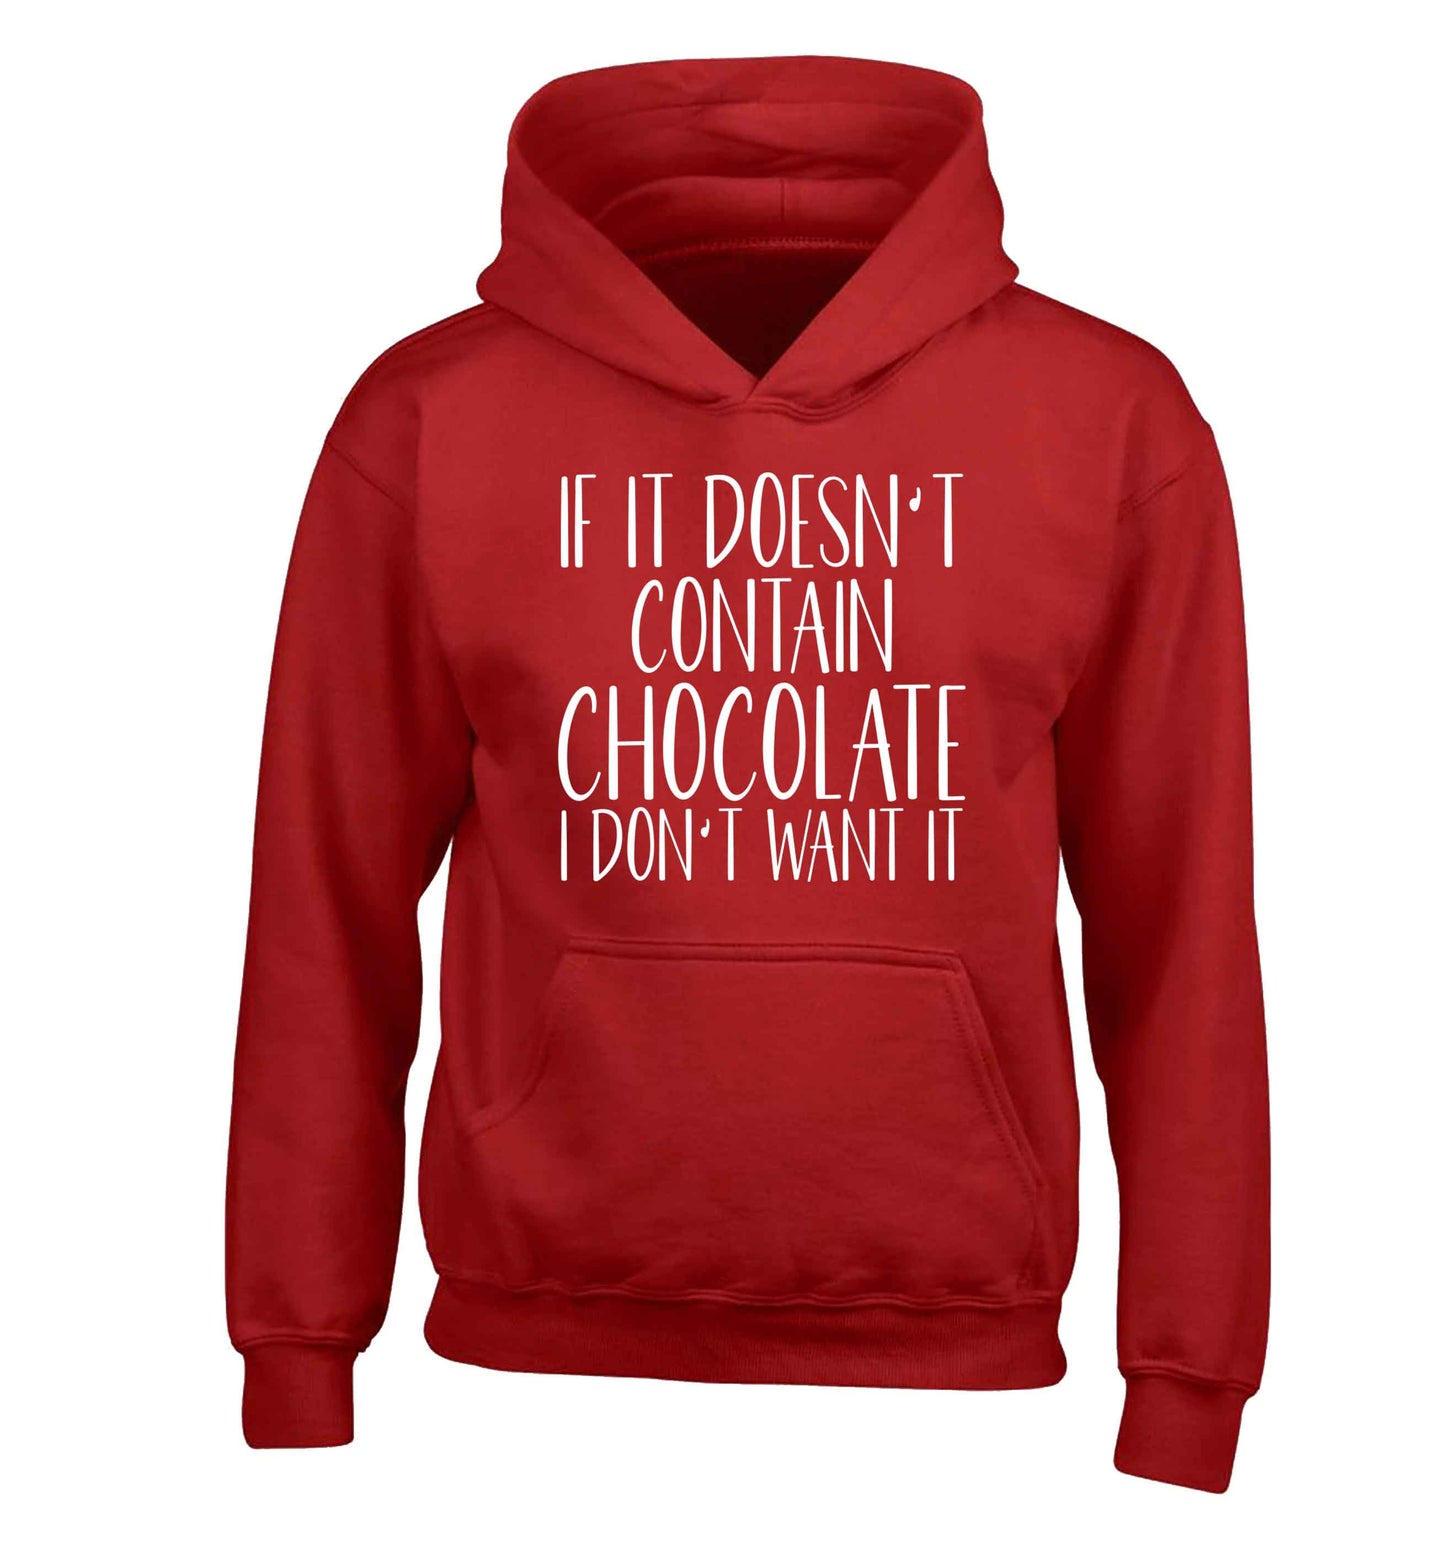 If it doesn't contain chocolate I don't want it children's red hoodie 12-13 Years